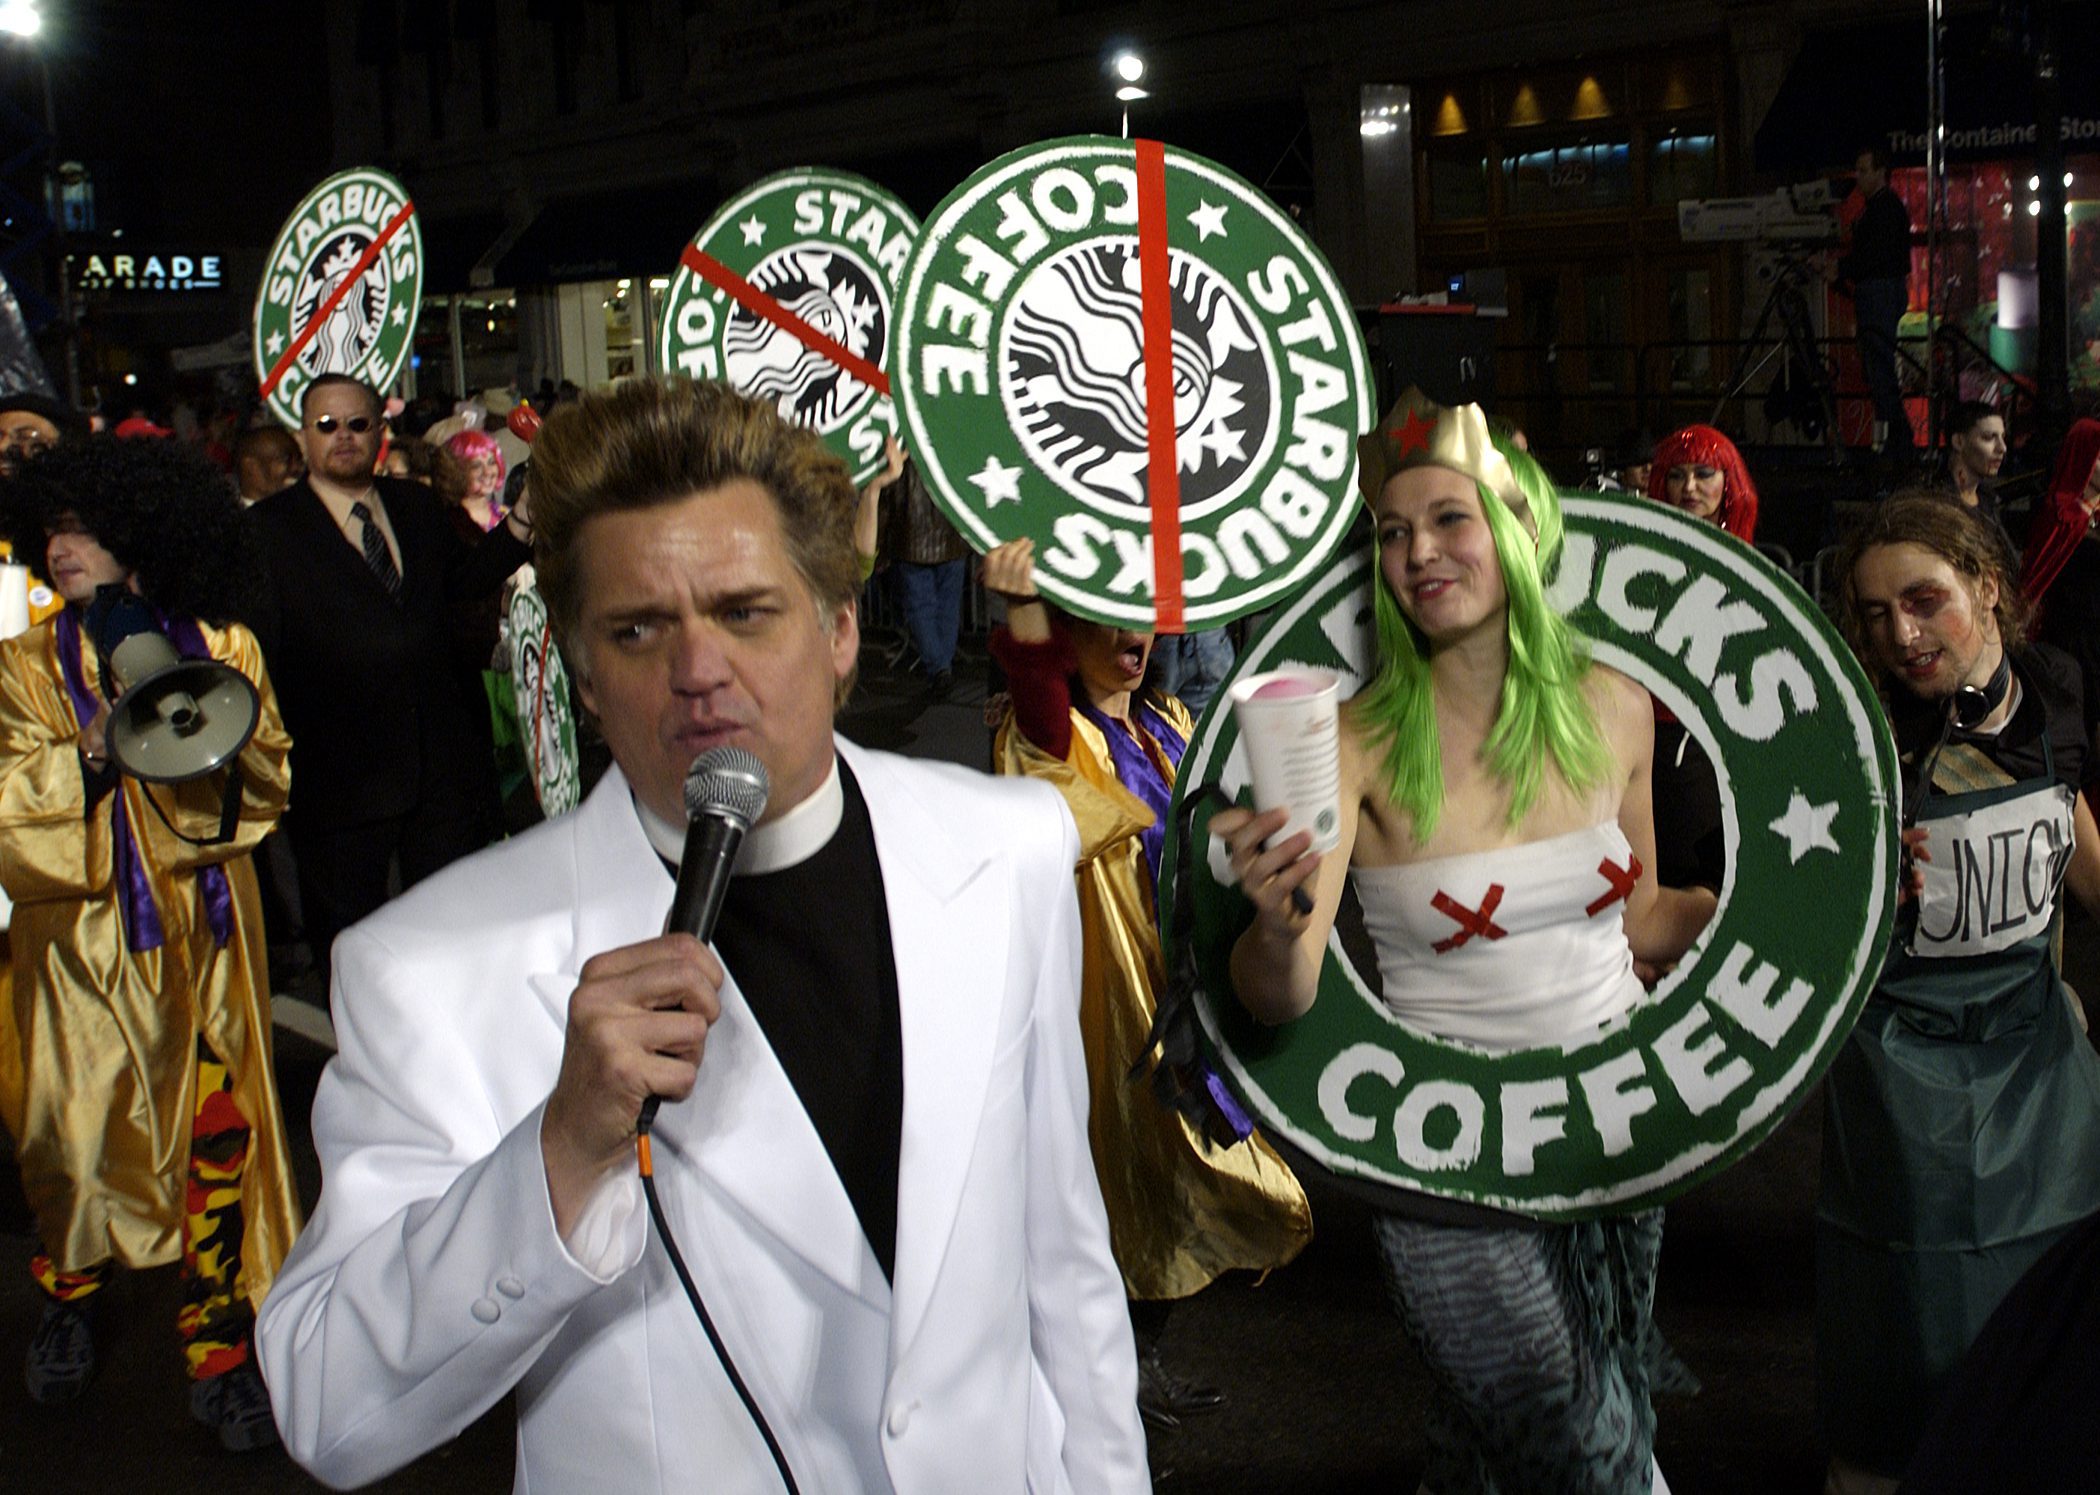 RevBilly and The stop Shopping Choir Starbucks protest